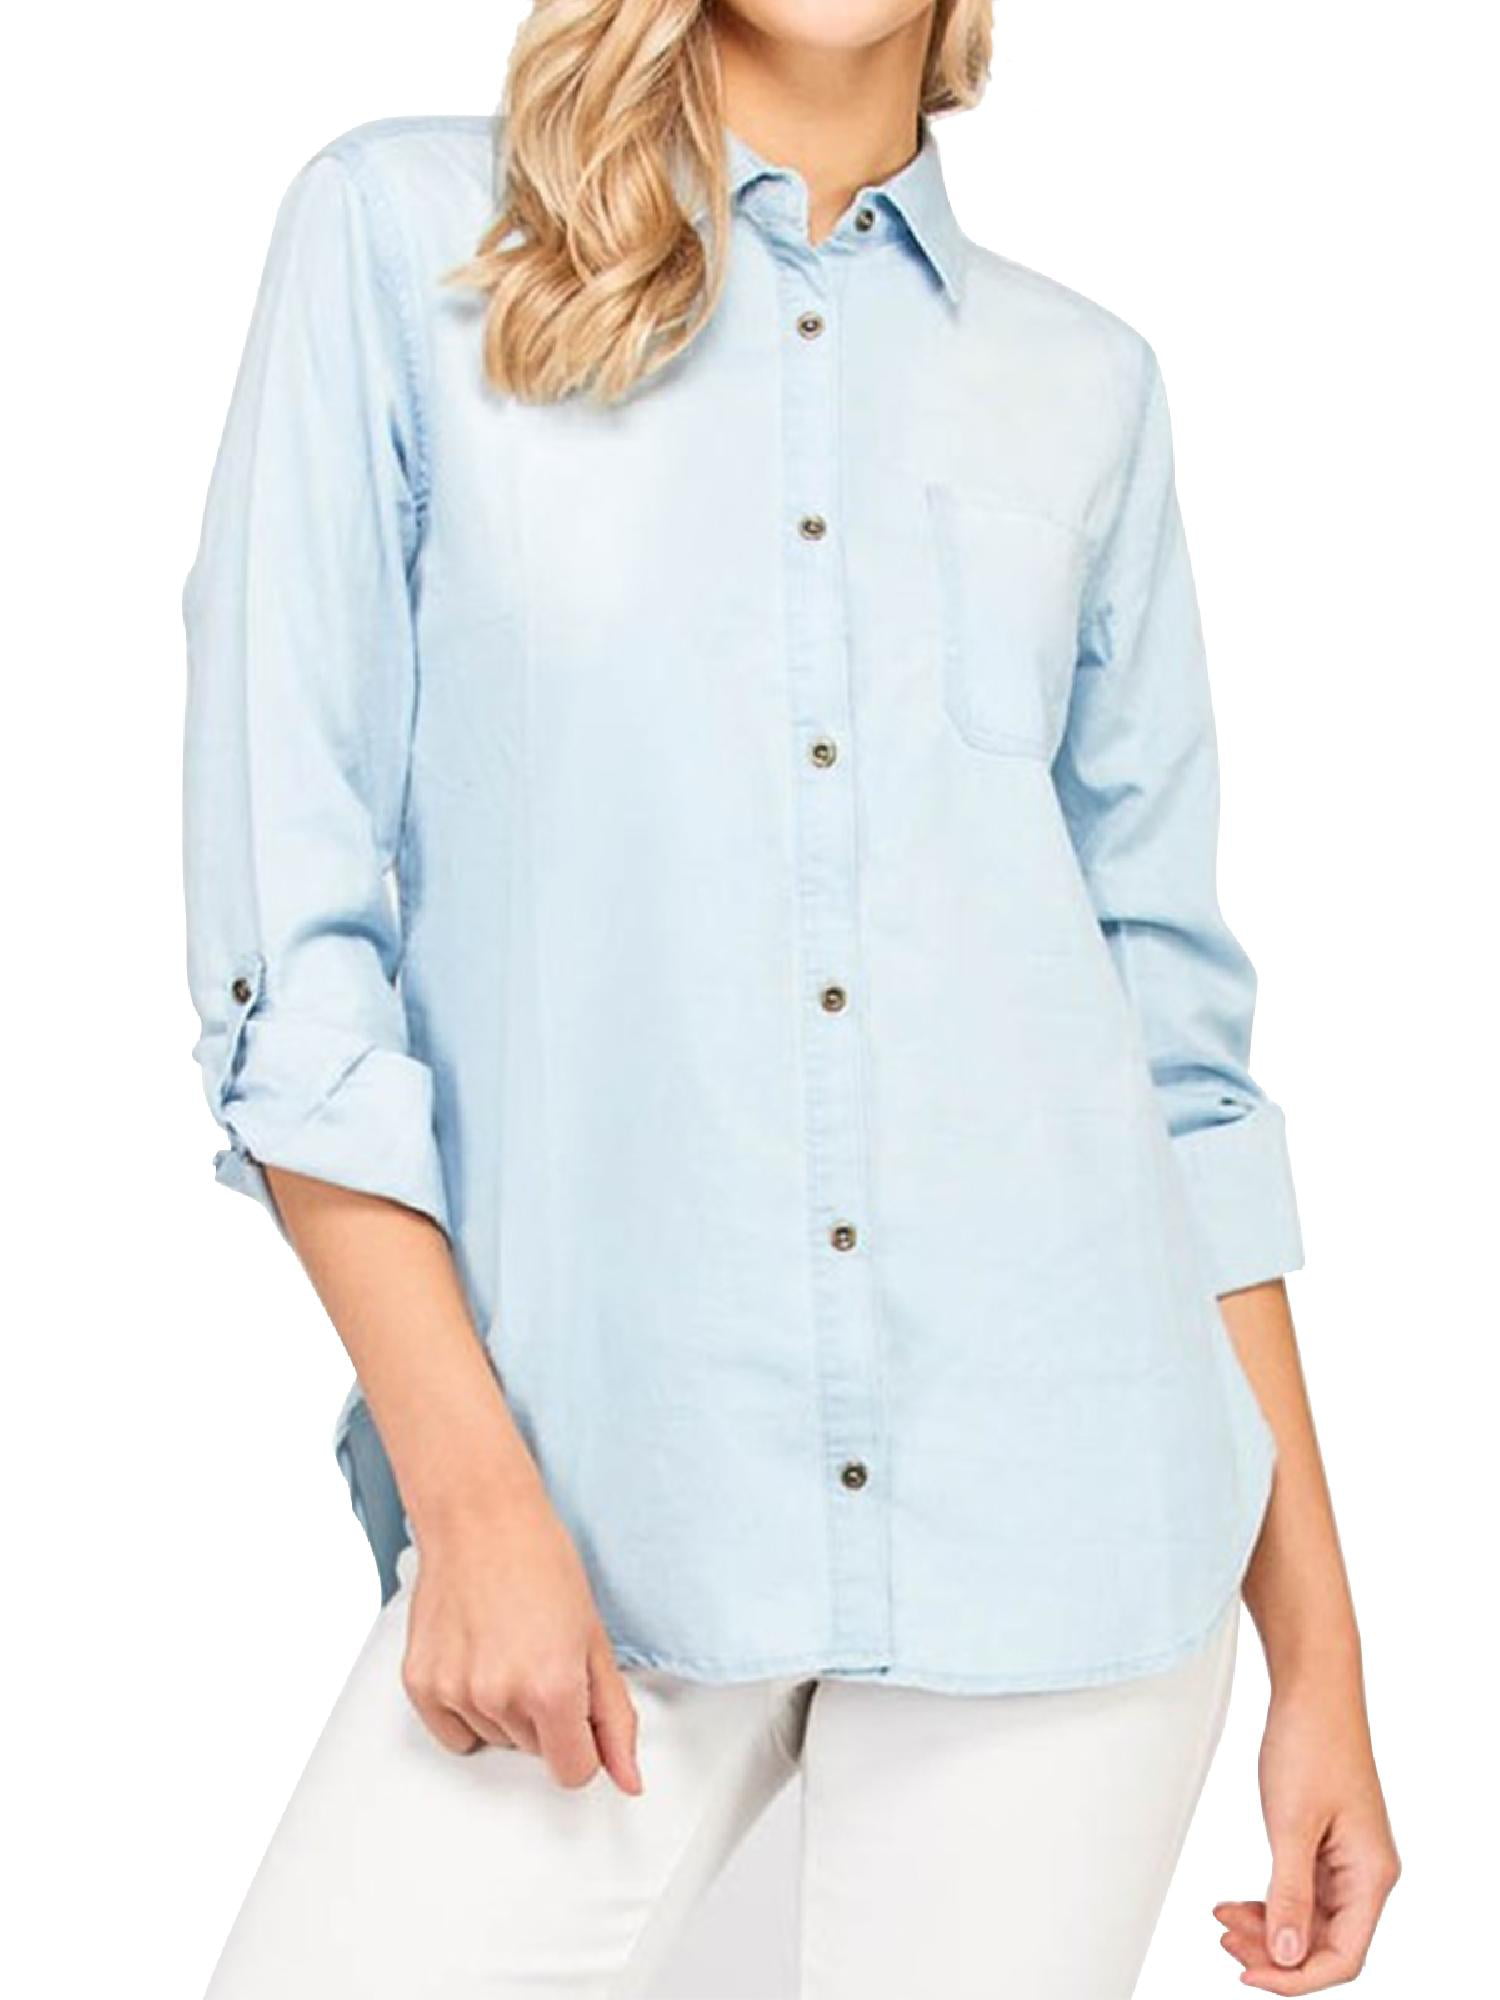 Made by Olivia - Made by Olivia Women's Basic & Classic Button Down ...